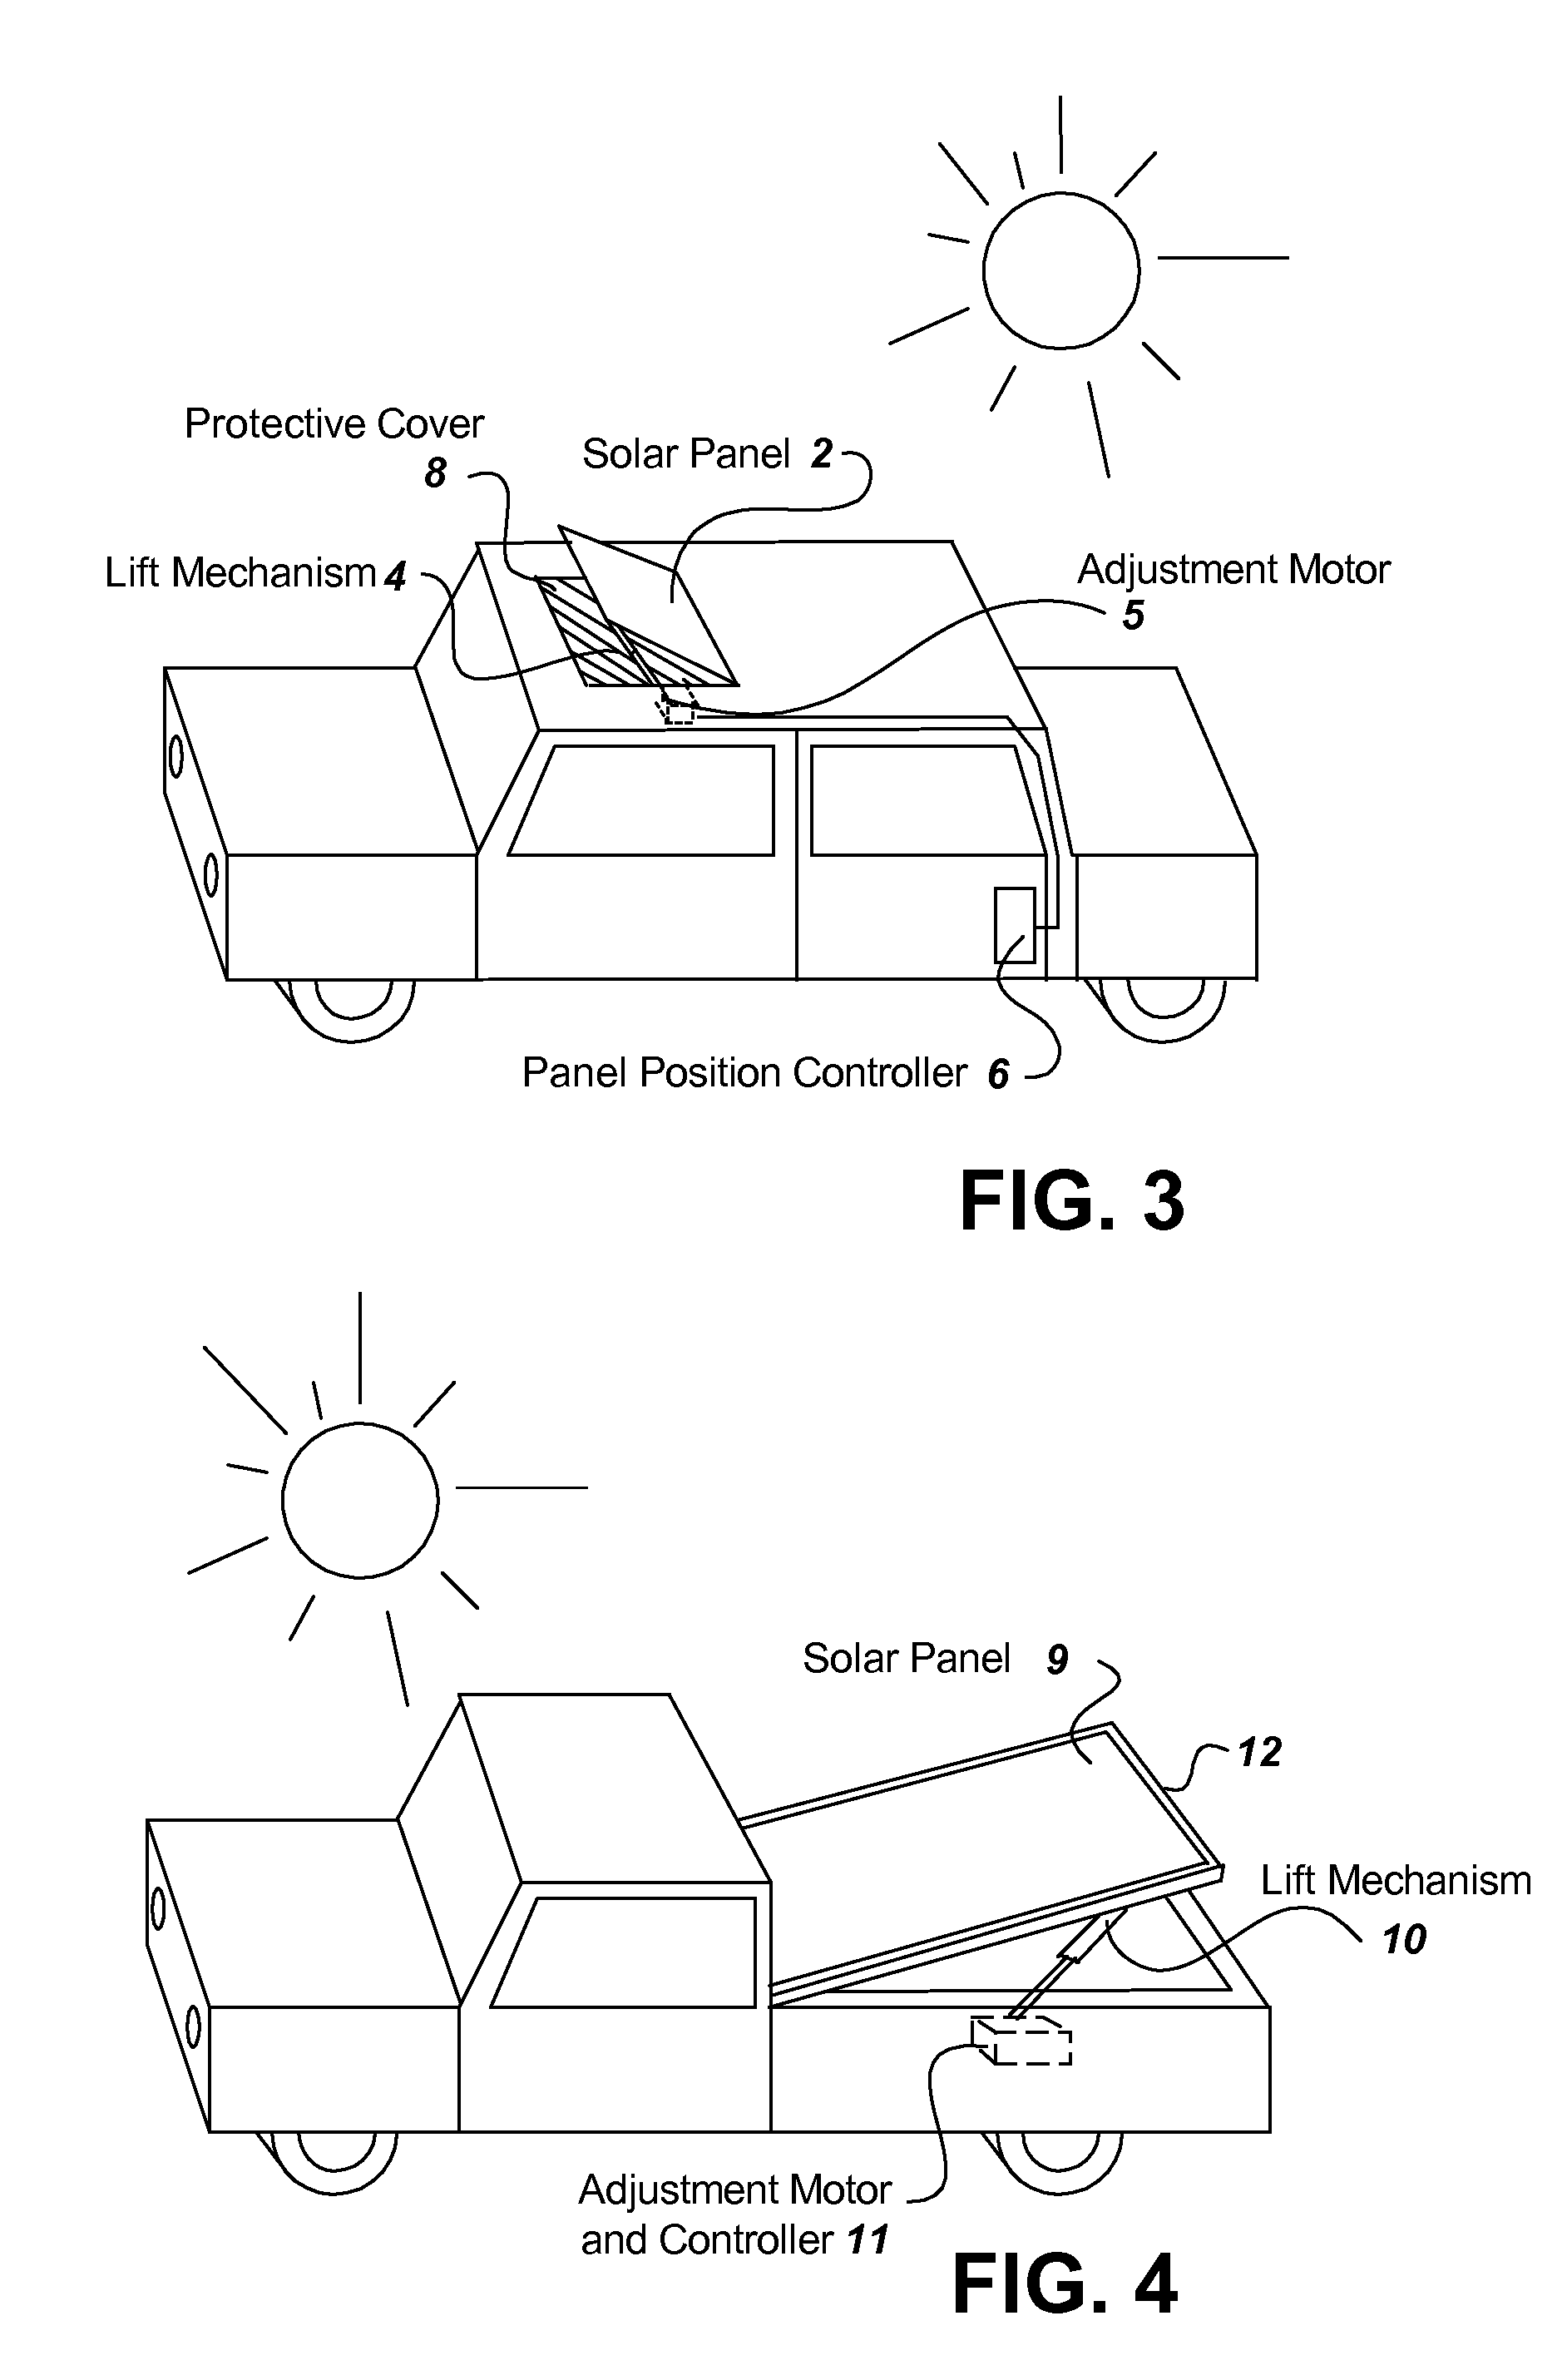 Hybrid vehicle with adjustable modular solar panel to increase charge generation